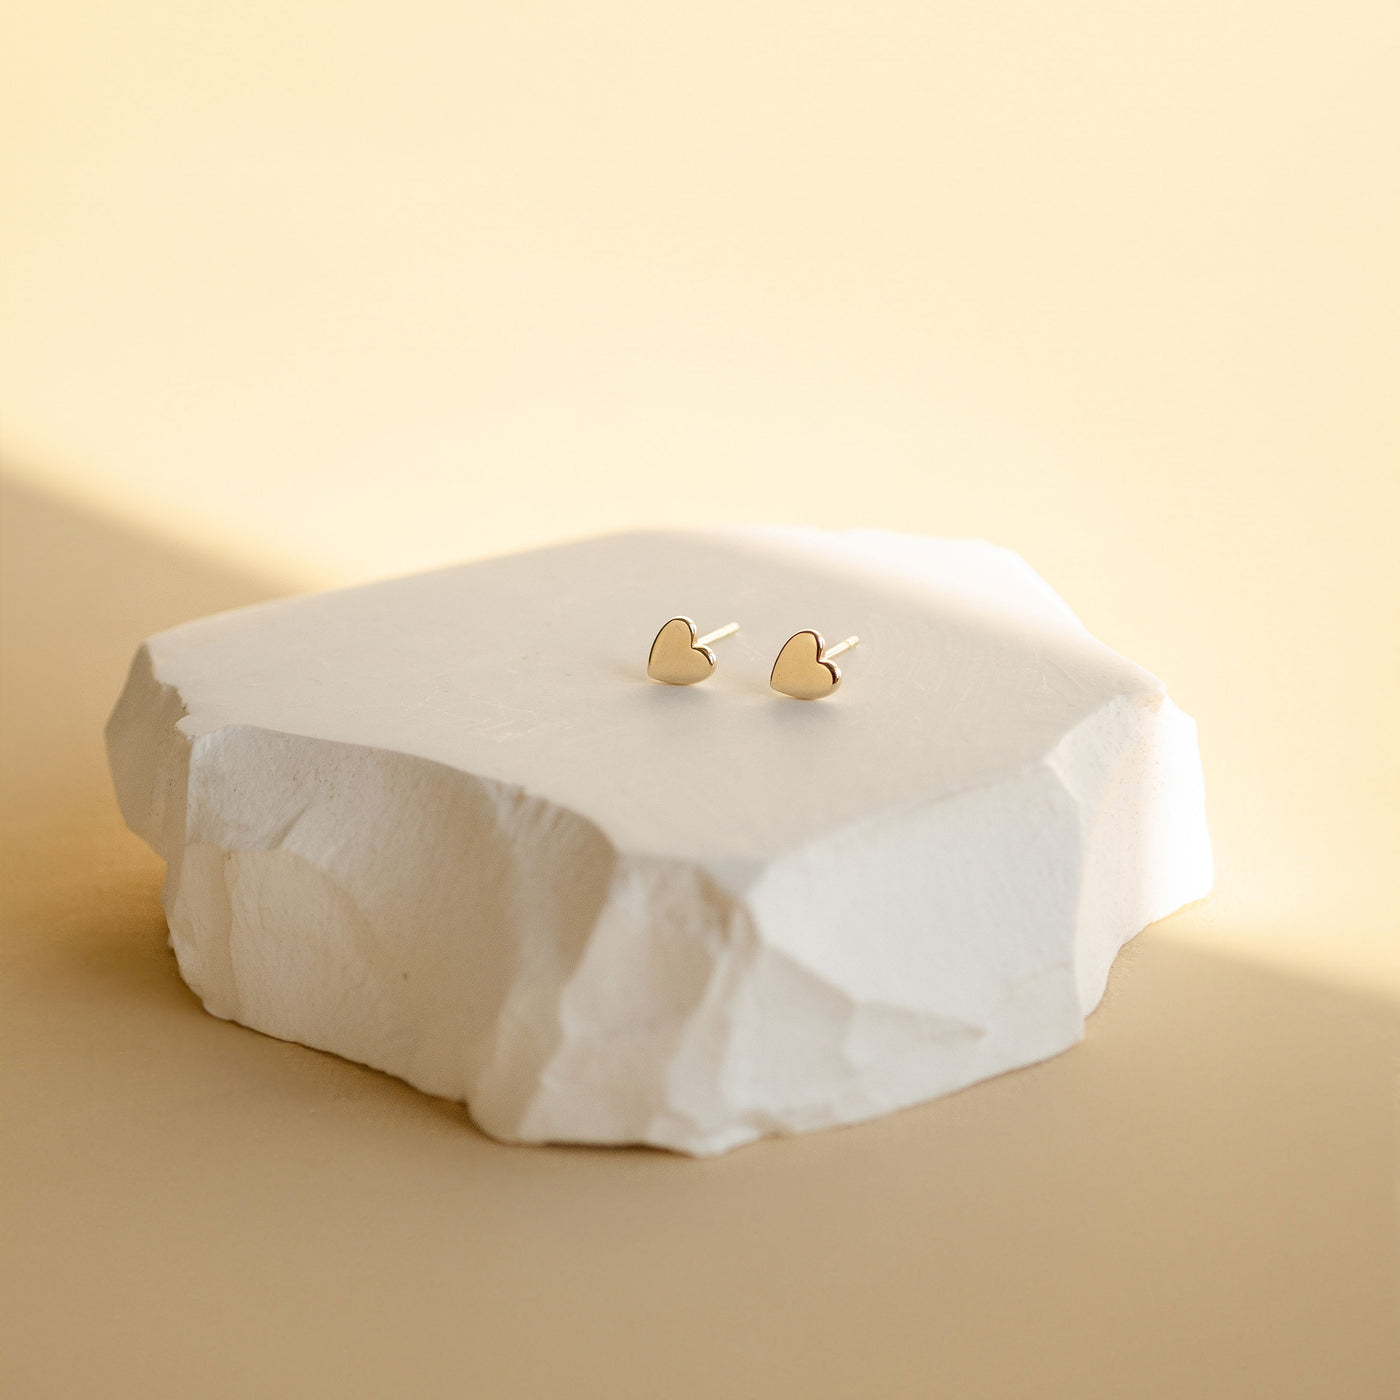 Compassion Stud Earrings 14K Gold